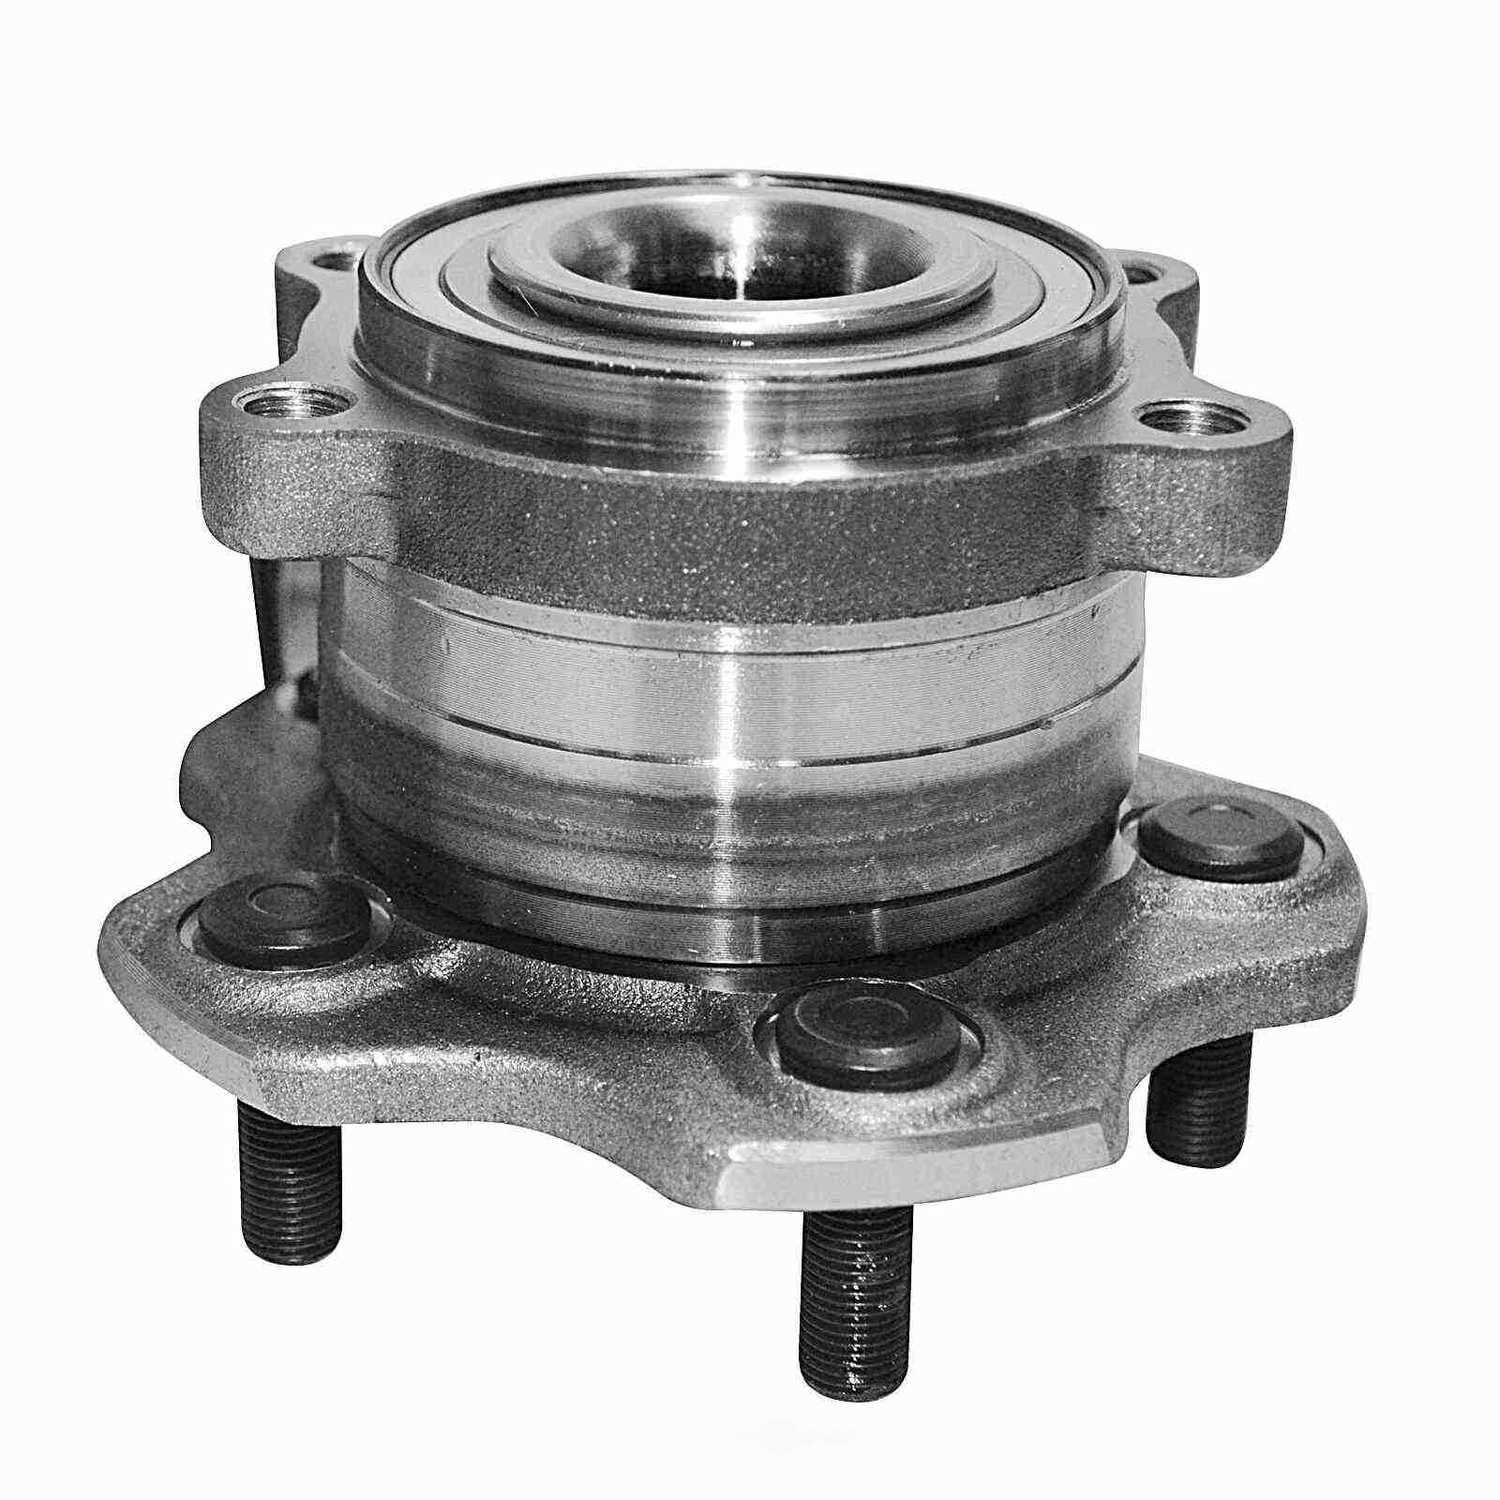 GSP NORTH AMERICA INC. - GSP New Wheel Bearing and Hub Assembly (Rear) - AD8 393379